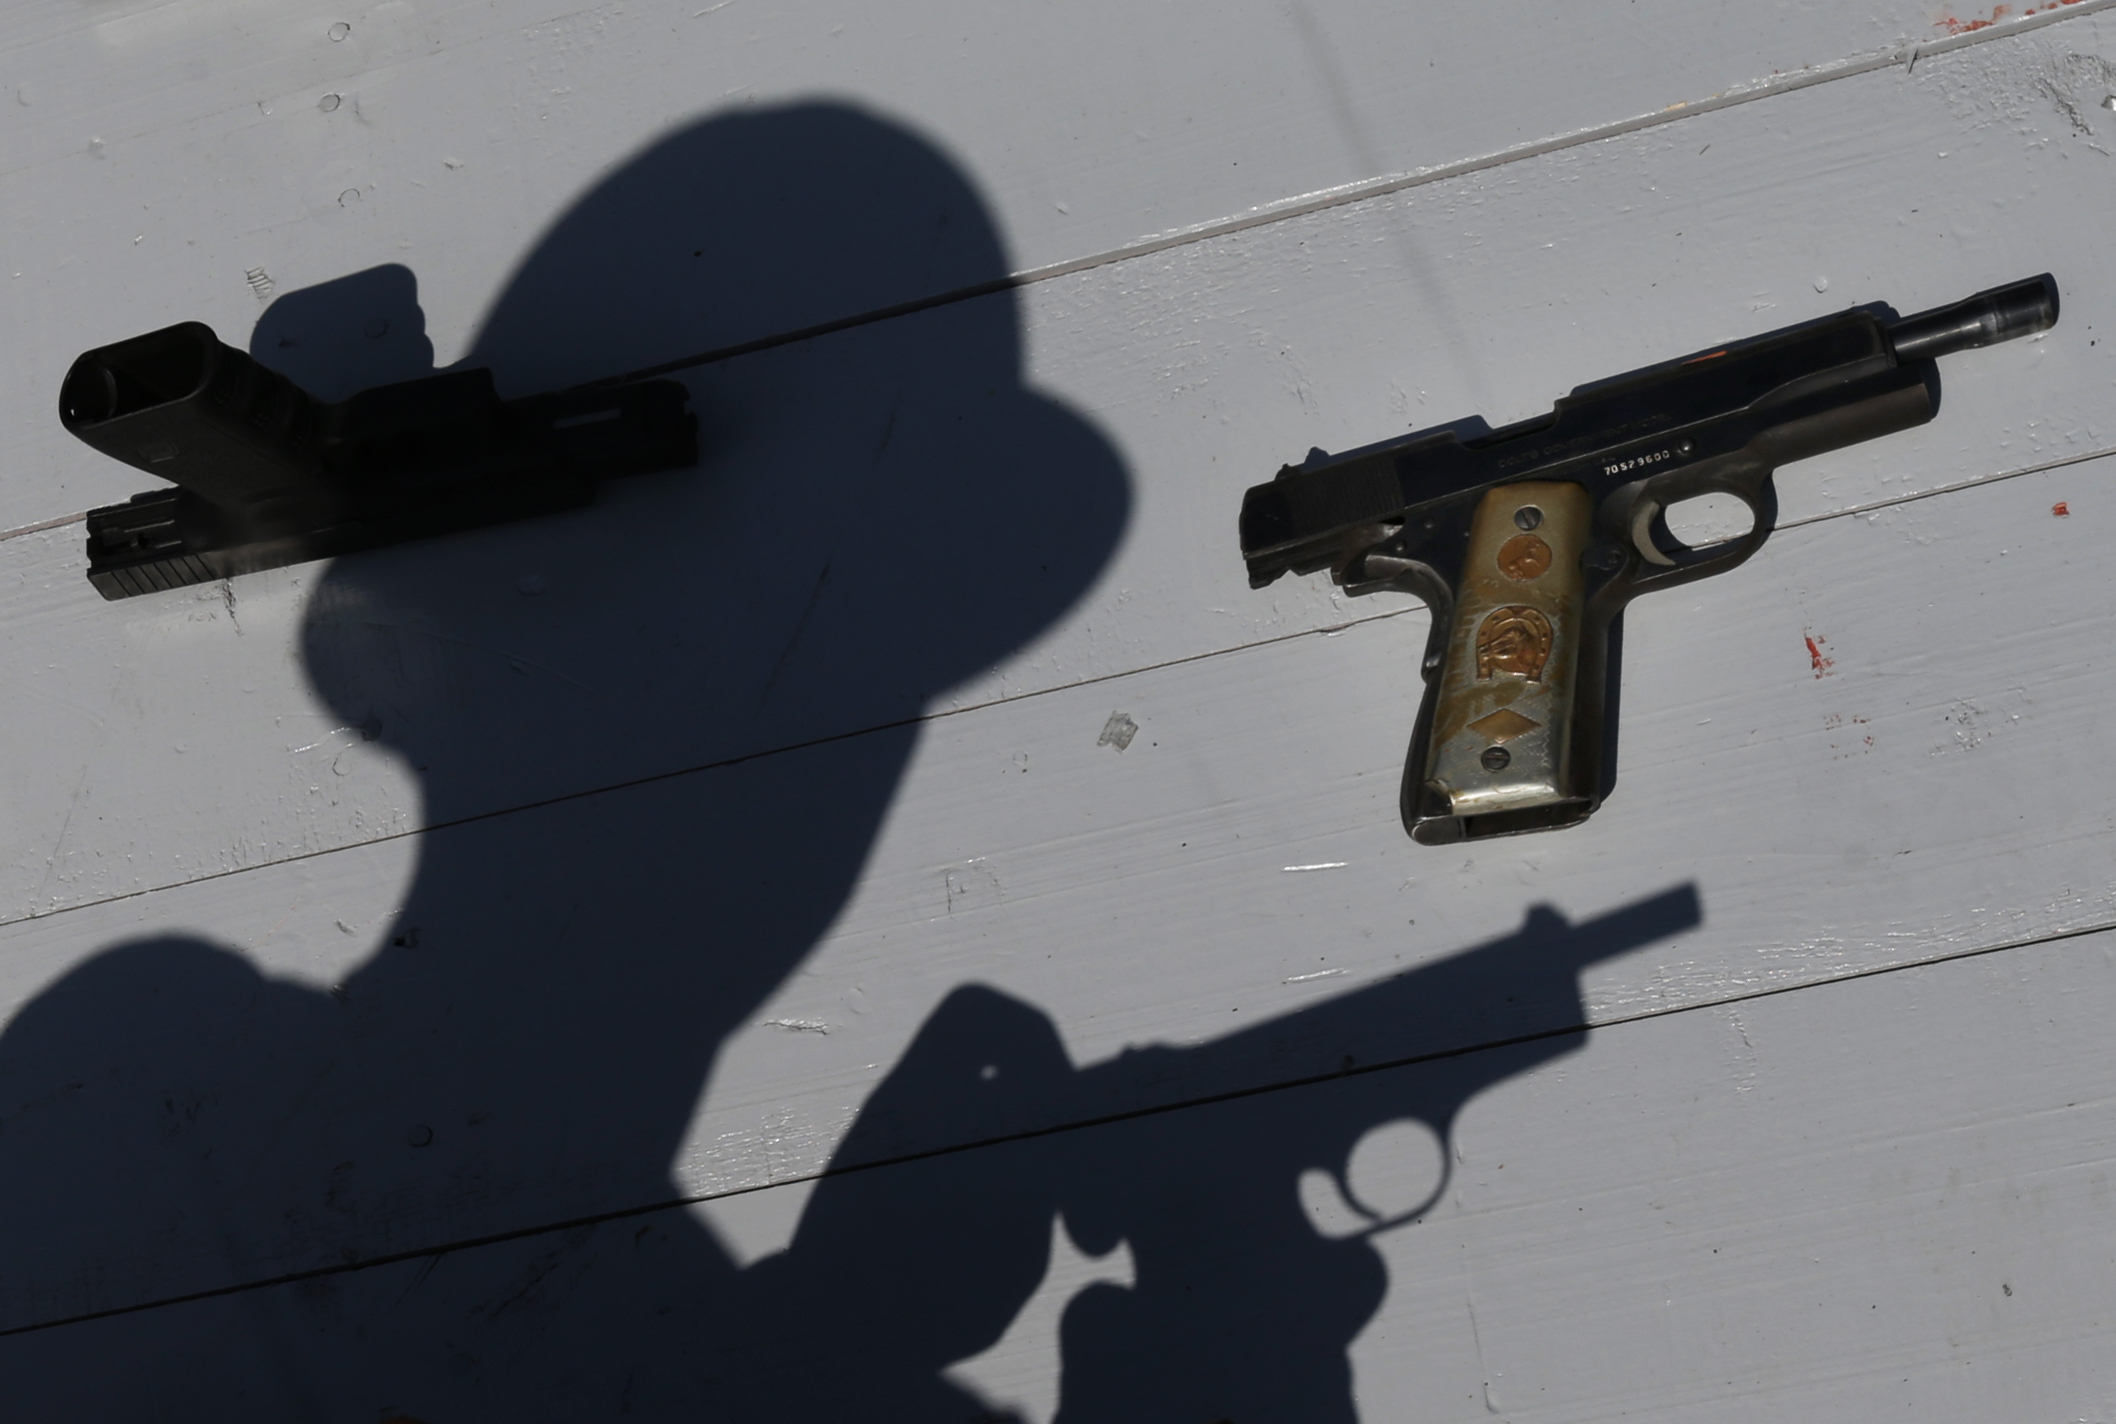 A Mexican army soldier shows a set of hand guns sporting a gold plated grips, part of a lot of weapons slated for destruction by the Mexican army in Mexico City, Tuesday, Aug. 1, 2017. The weapons were confiscated from organized crime and civilians who turned them in. (AP Photo/Marco Ugarte)